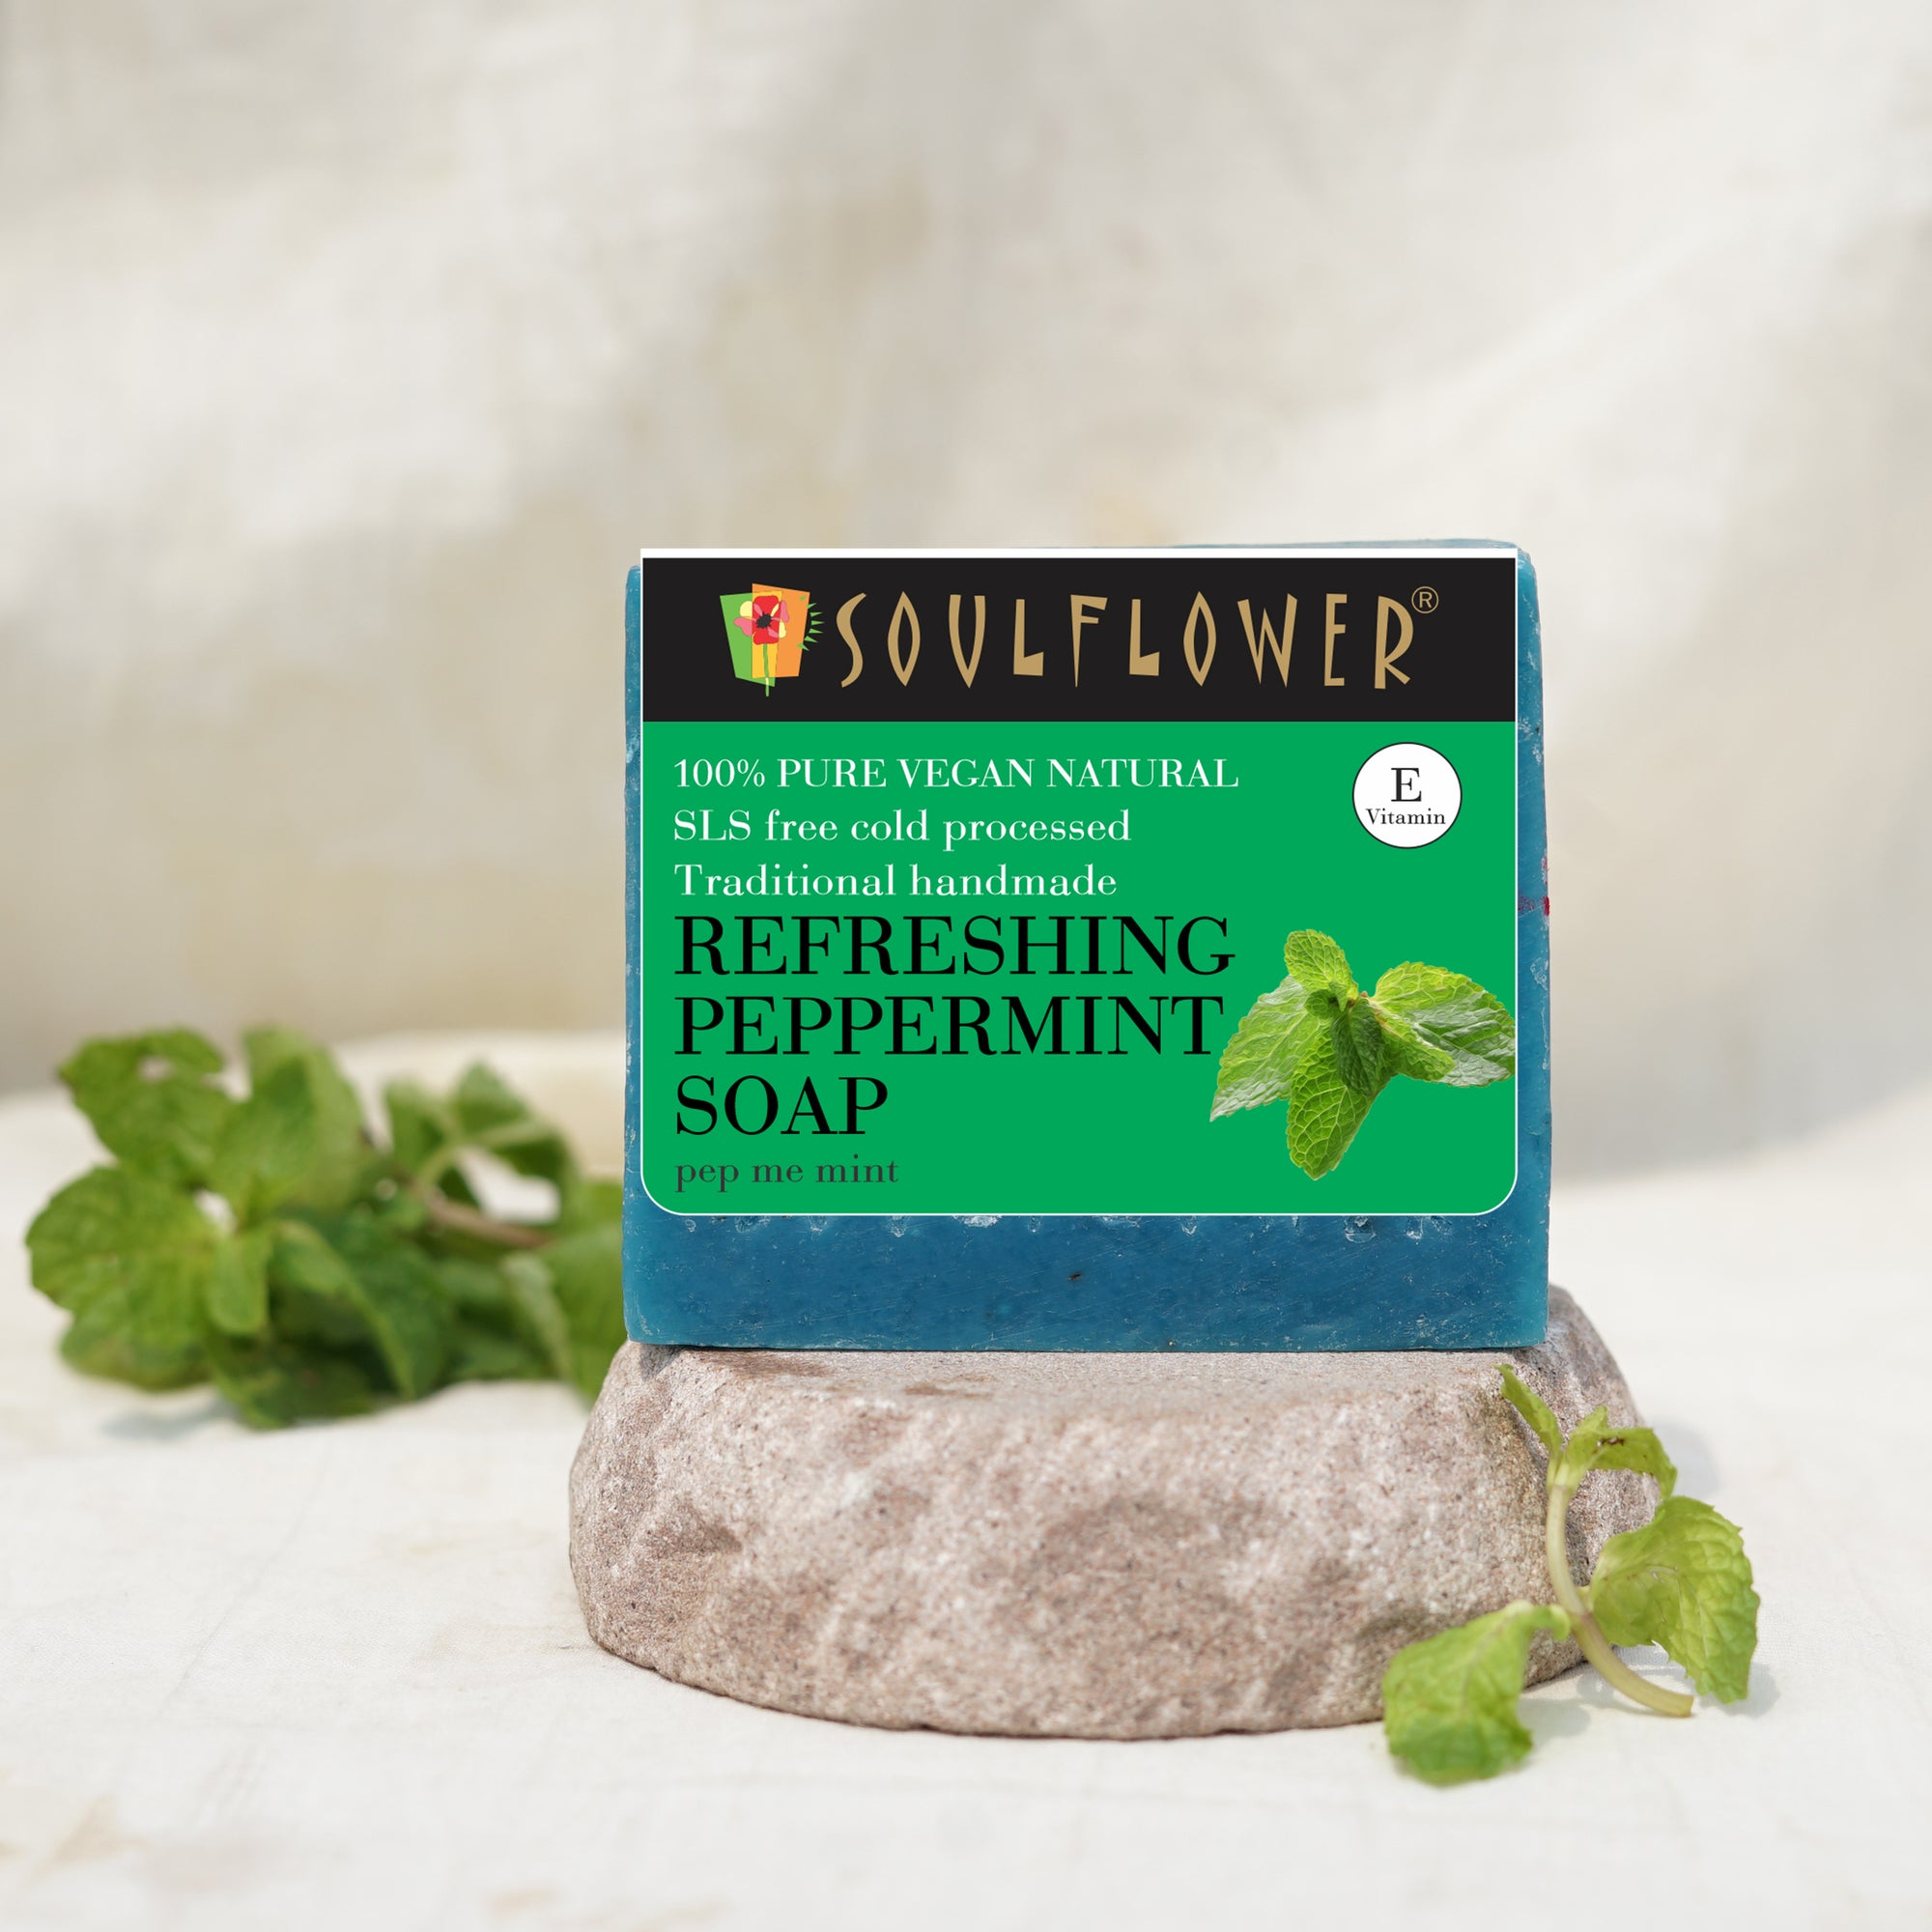 Feel the Chill with Peppermint: The Latest Skincare Must-Have